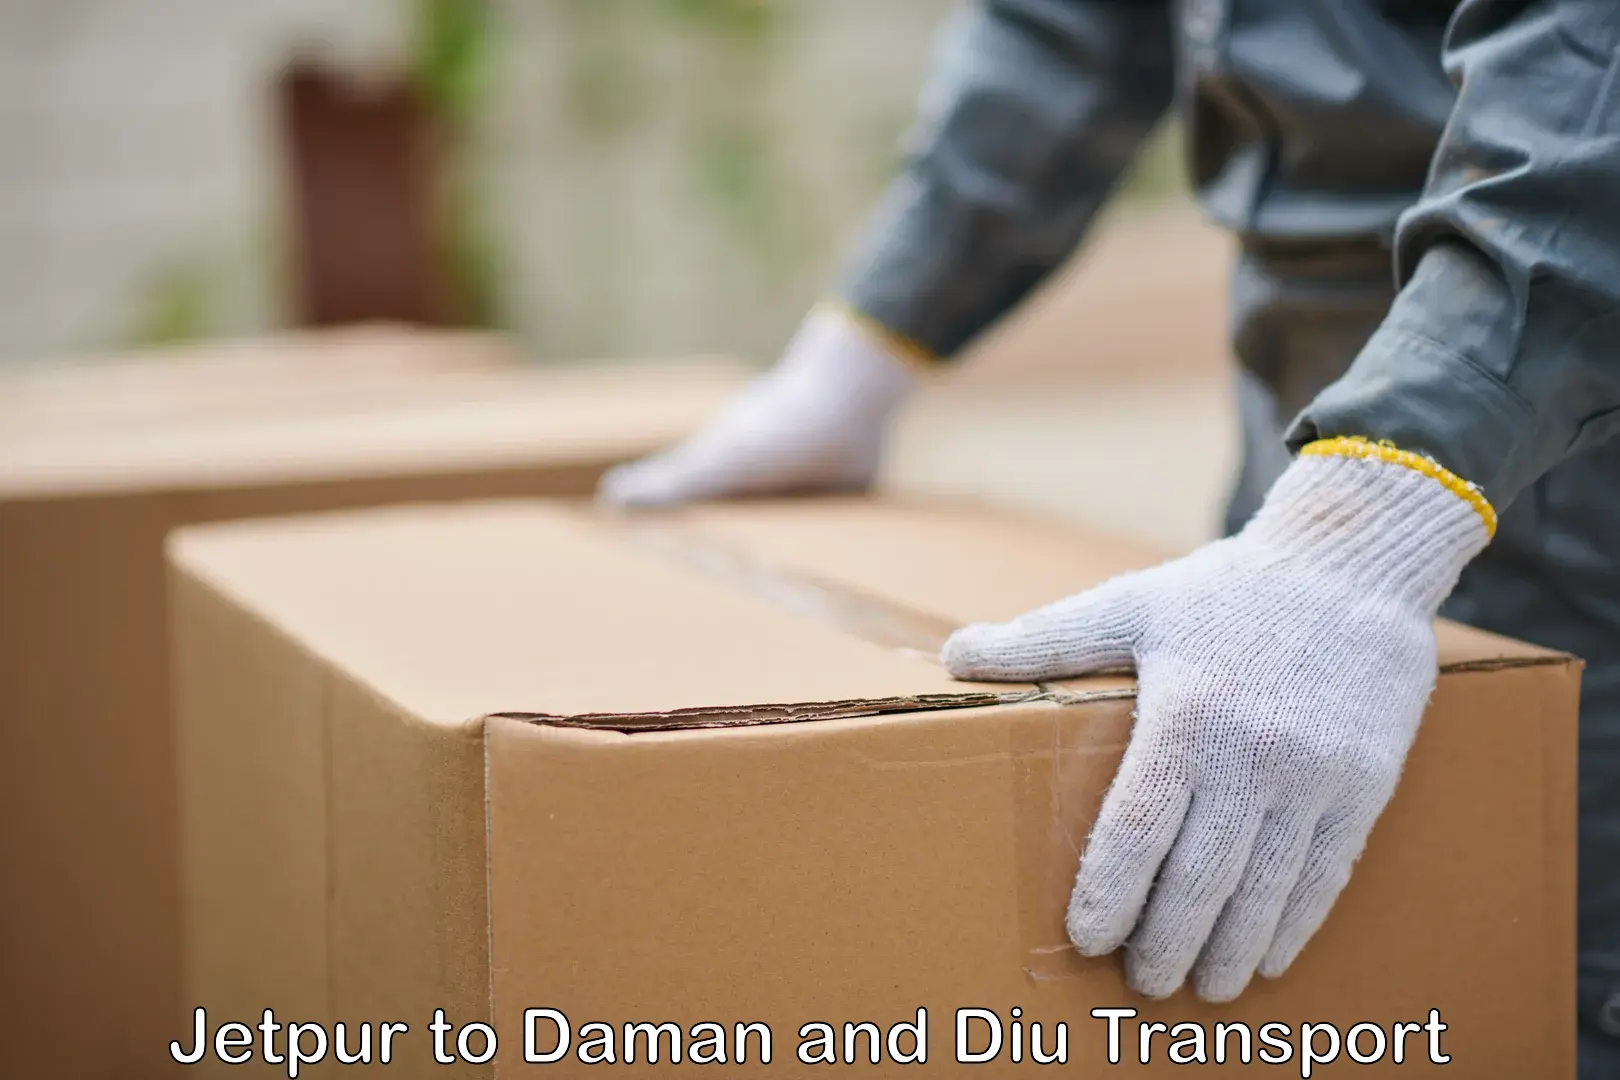 Transport shared services Jetpur to Daman and Diu